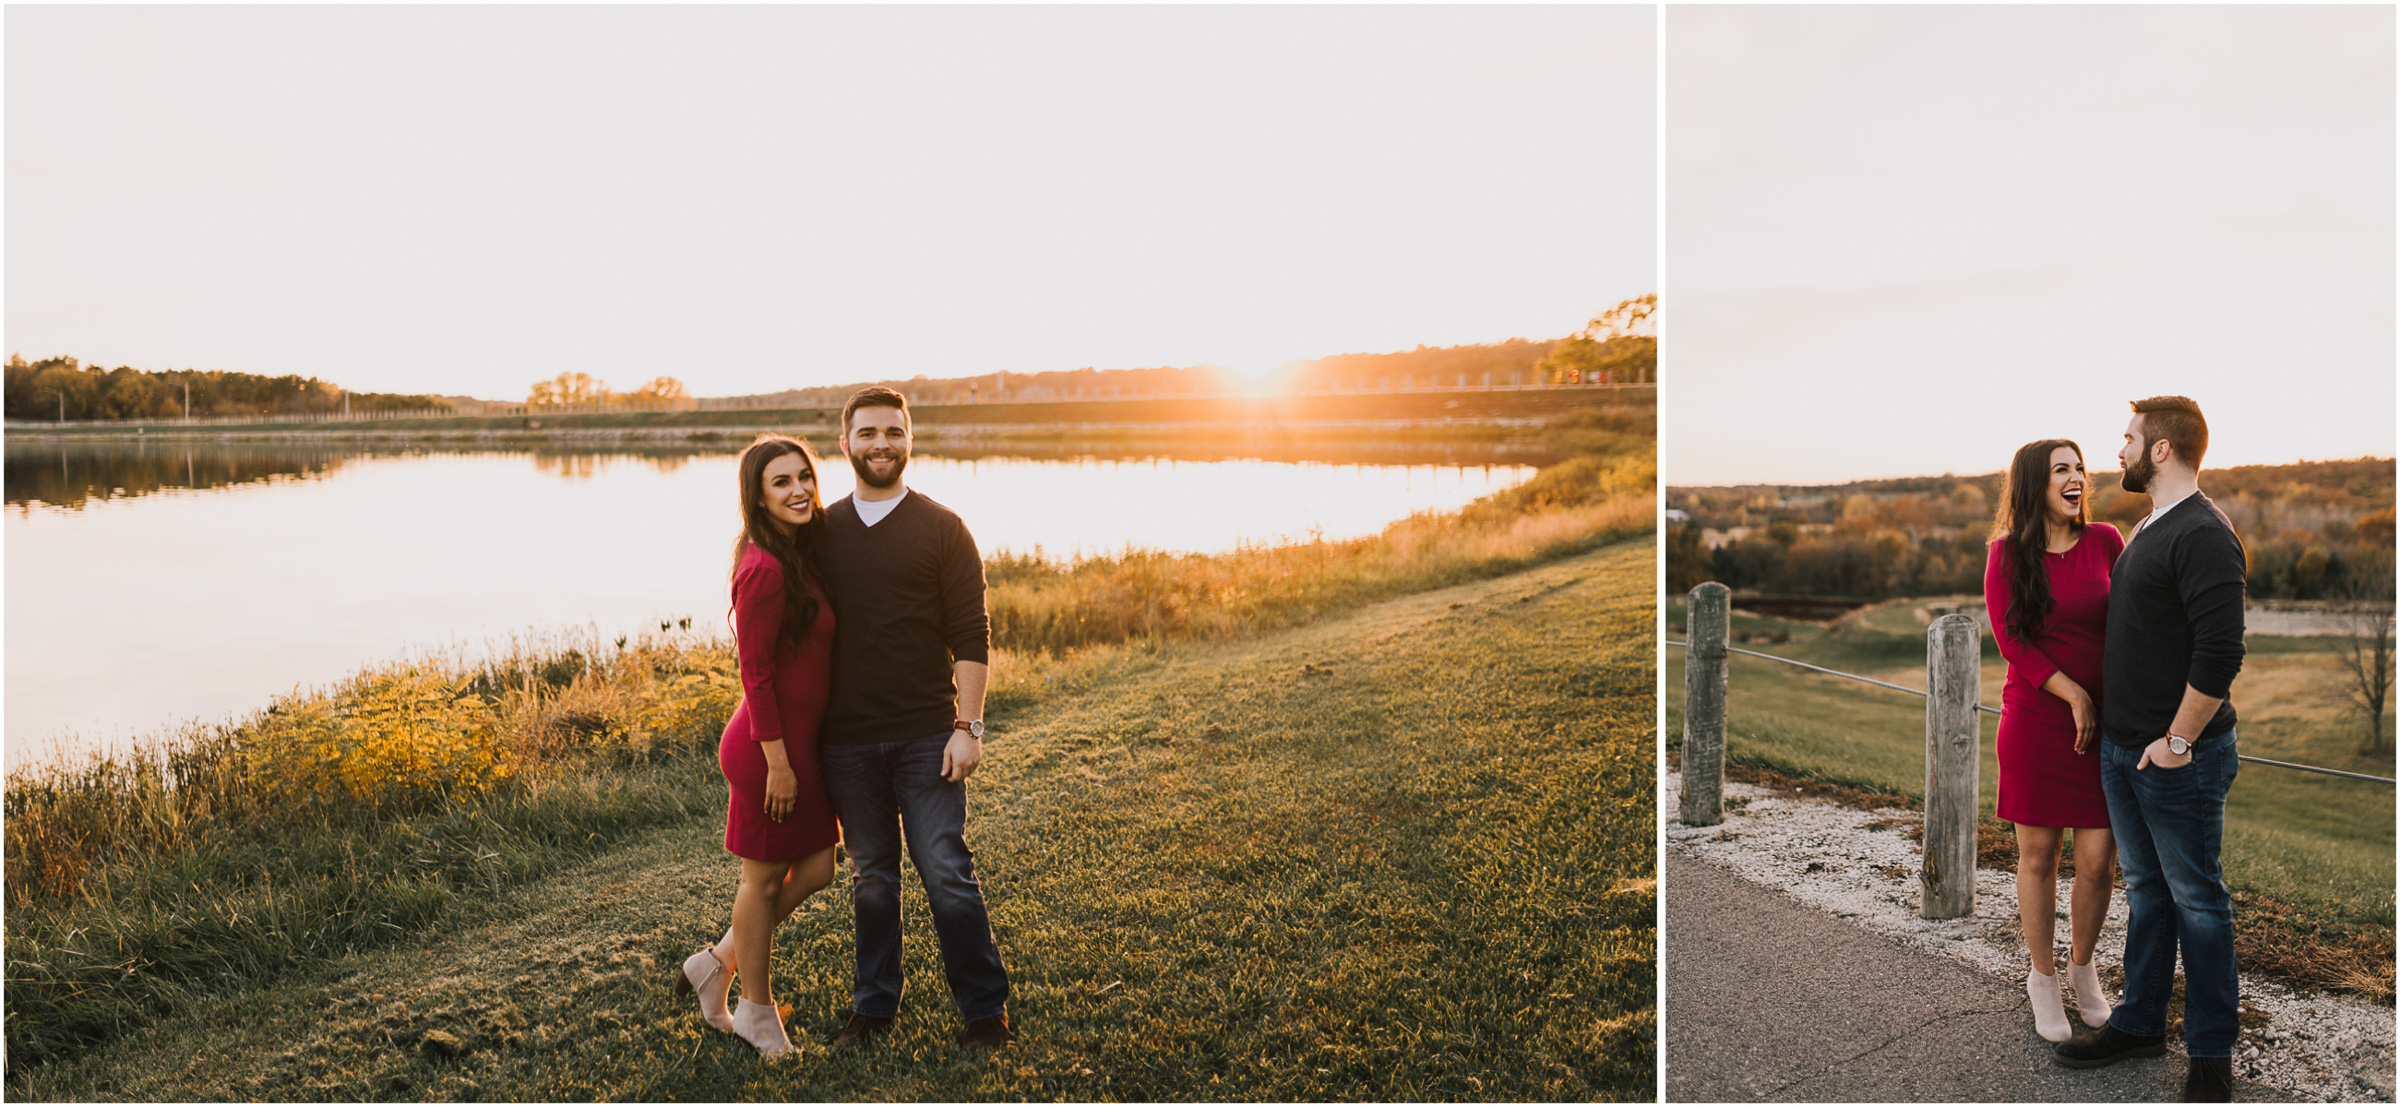 Chelsea and Logan // Playful and Romantic Autumn Engagement Session ...